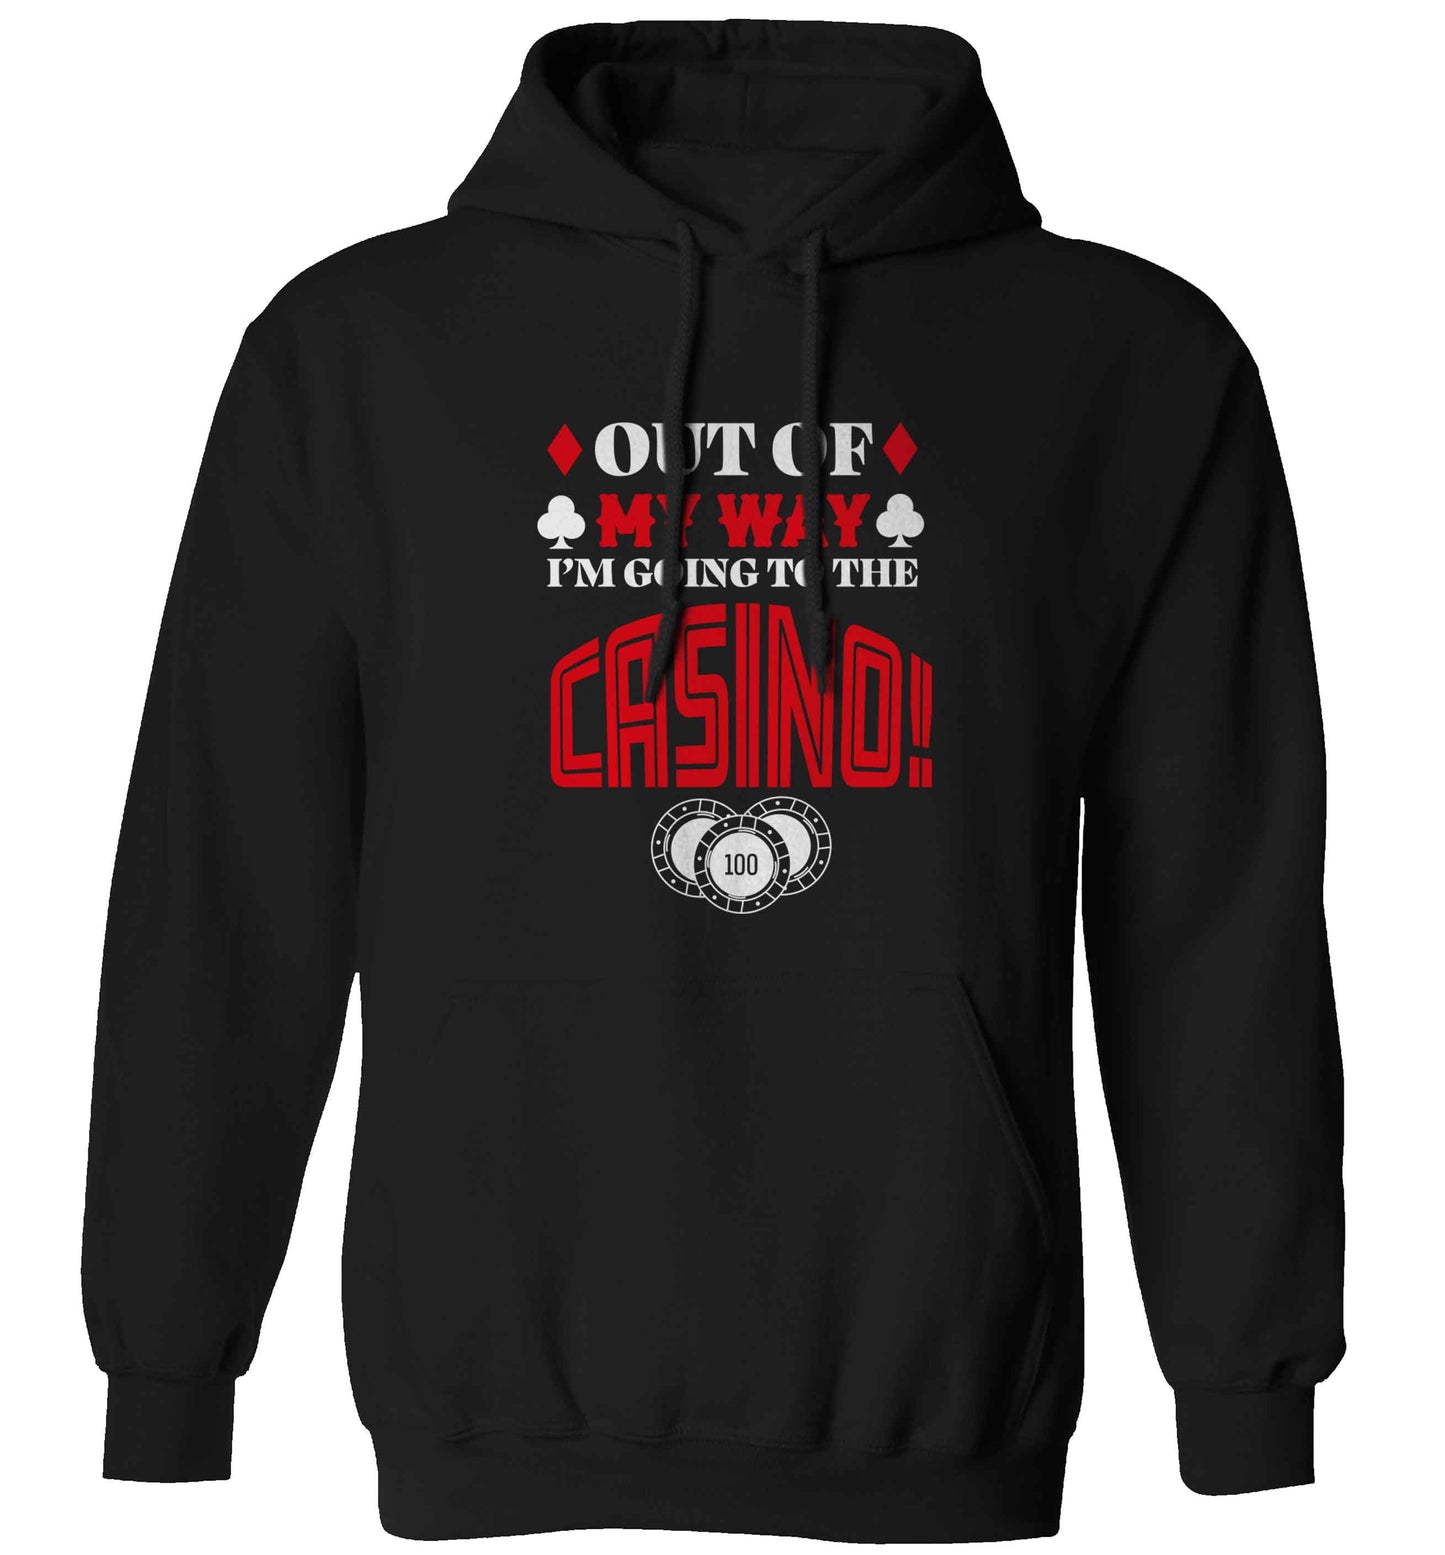 Out of my way I'm going to the casino adults unisex black hoodie 2XL